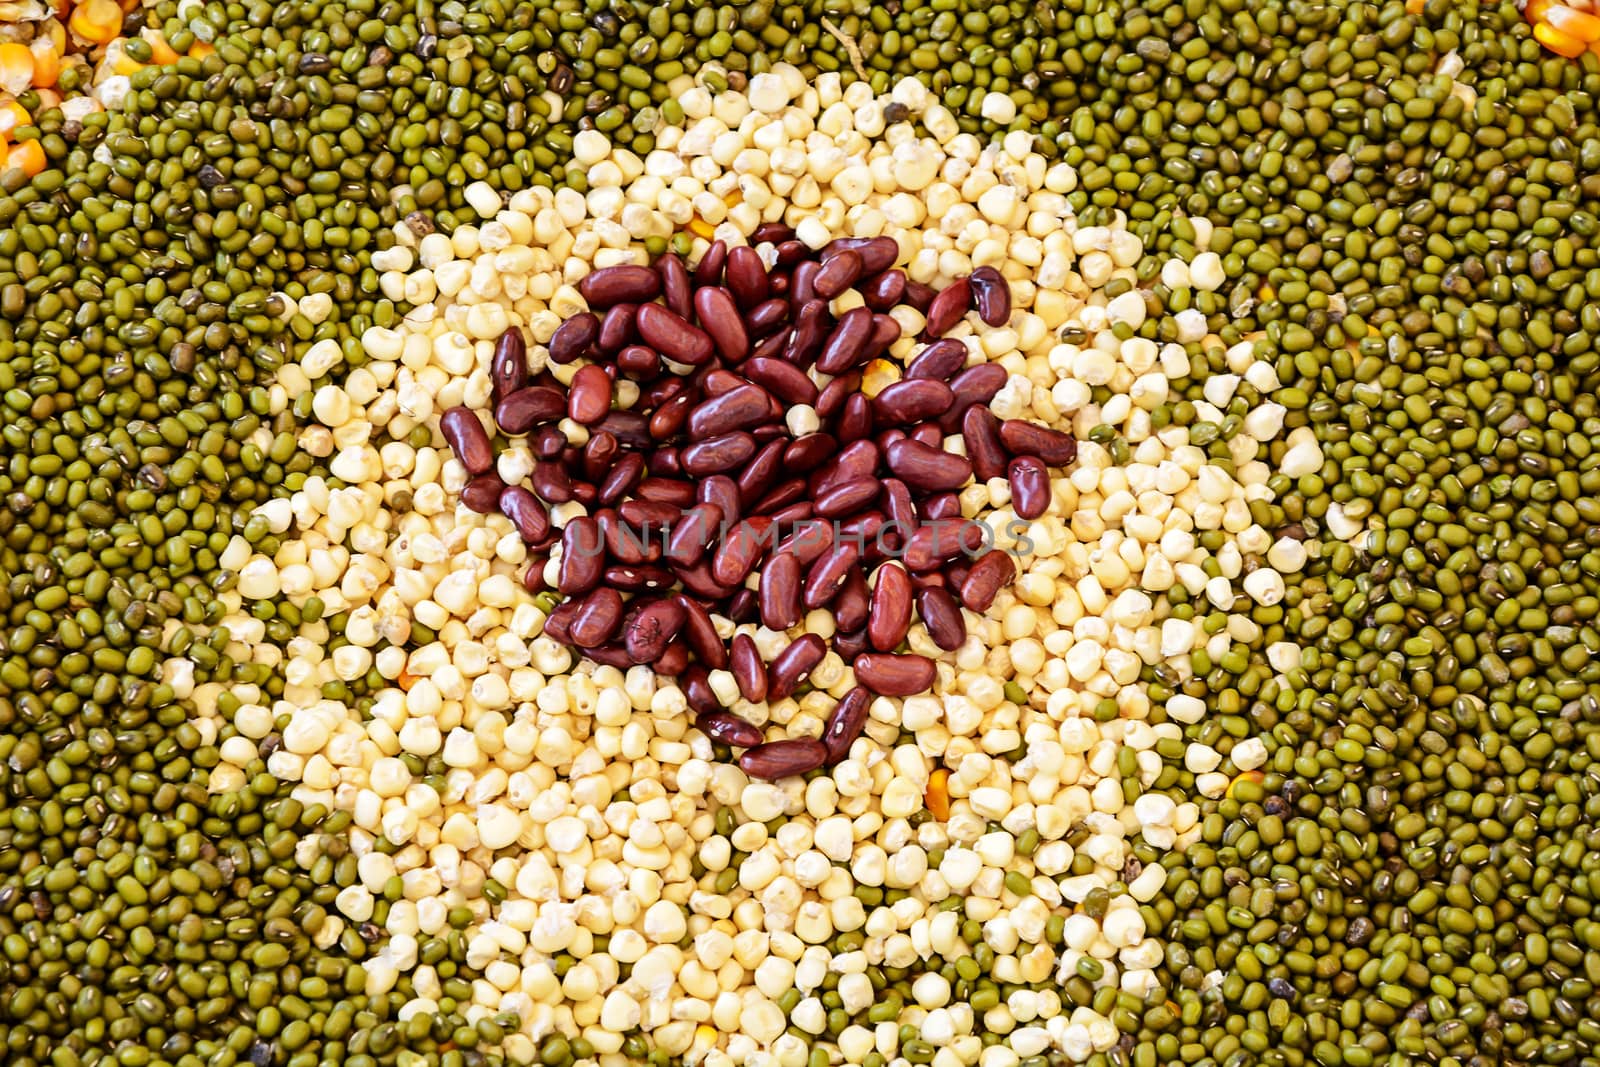 Seeds Spread a flat sheet by NuwatPhoto